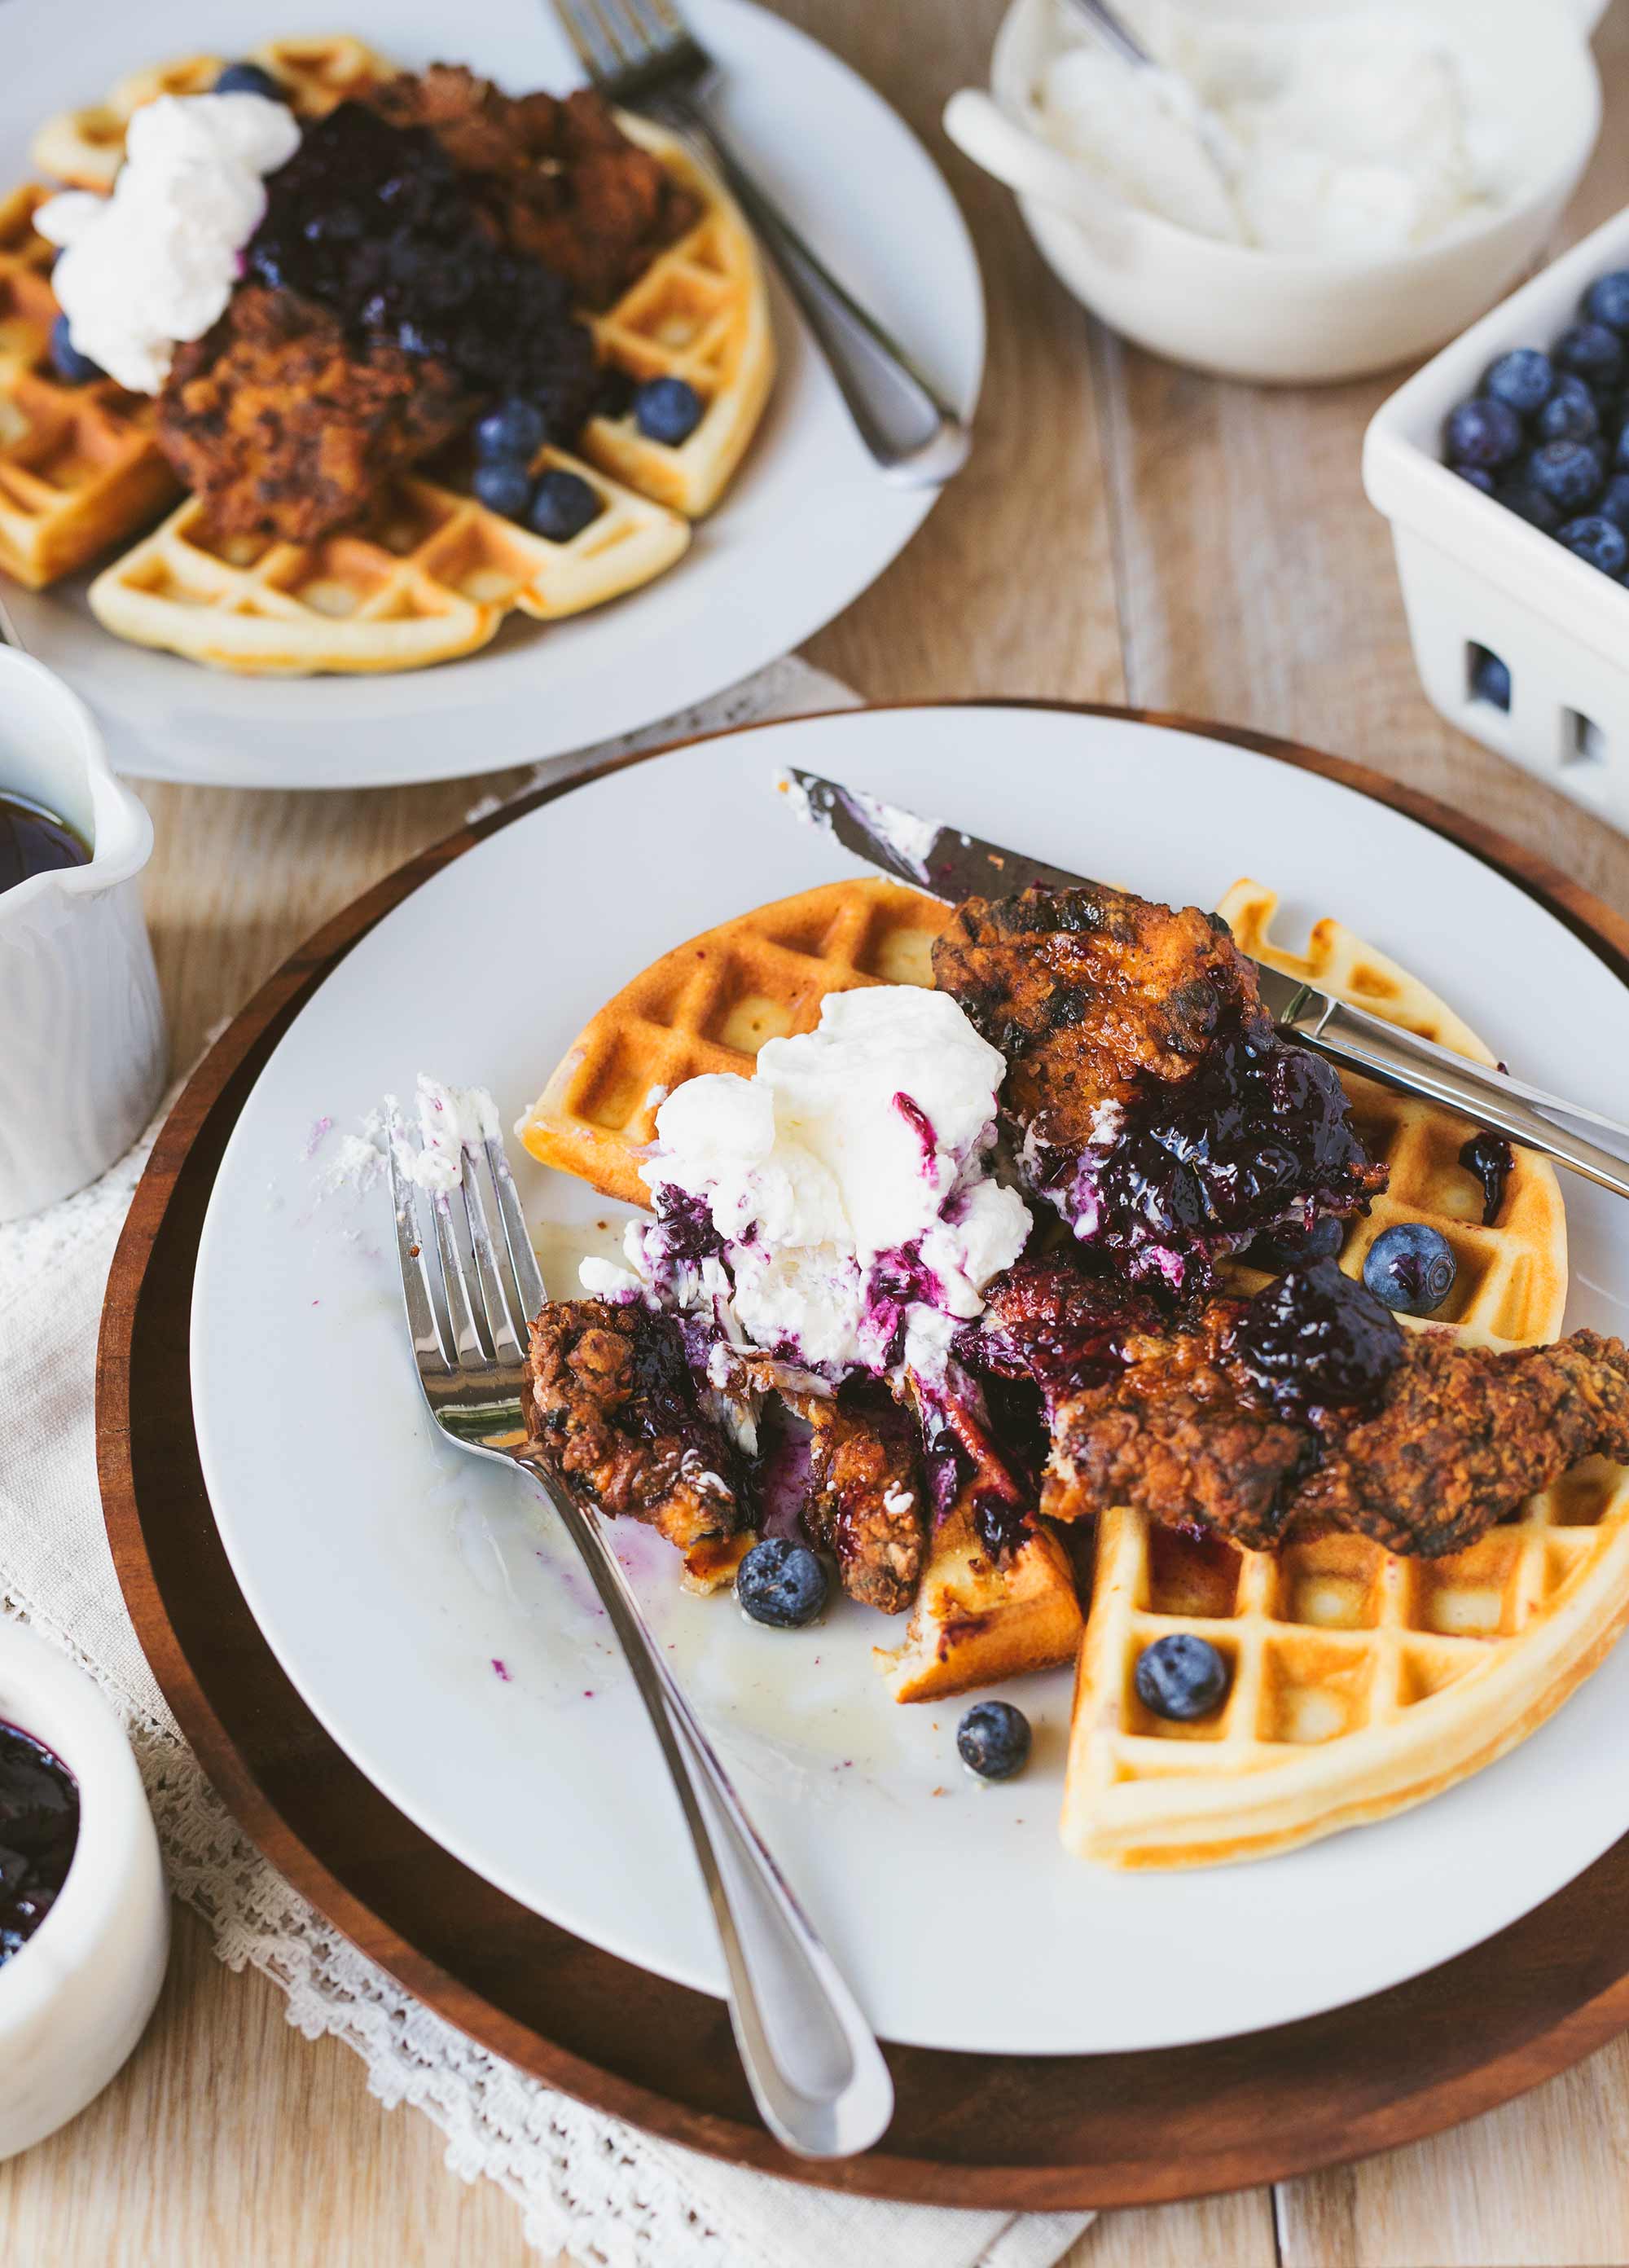 Chicken & Waffles with Blueberry Compote and Maple Syrup